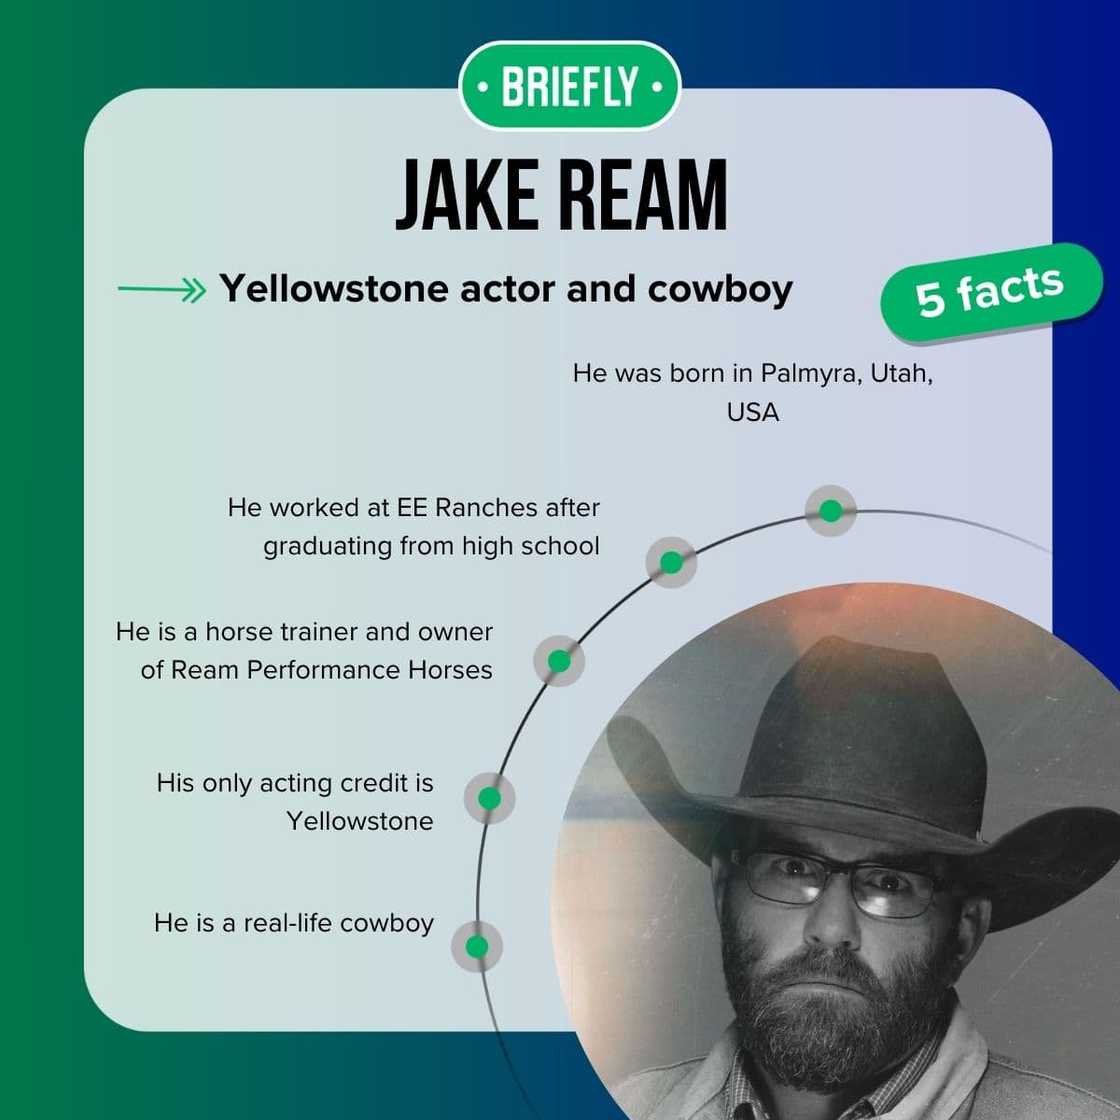 Jake Ream's facts